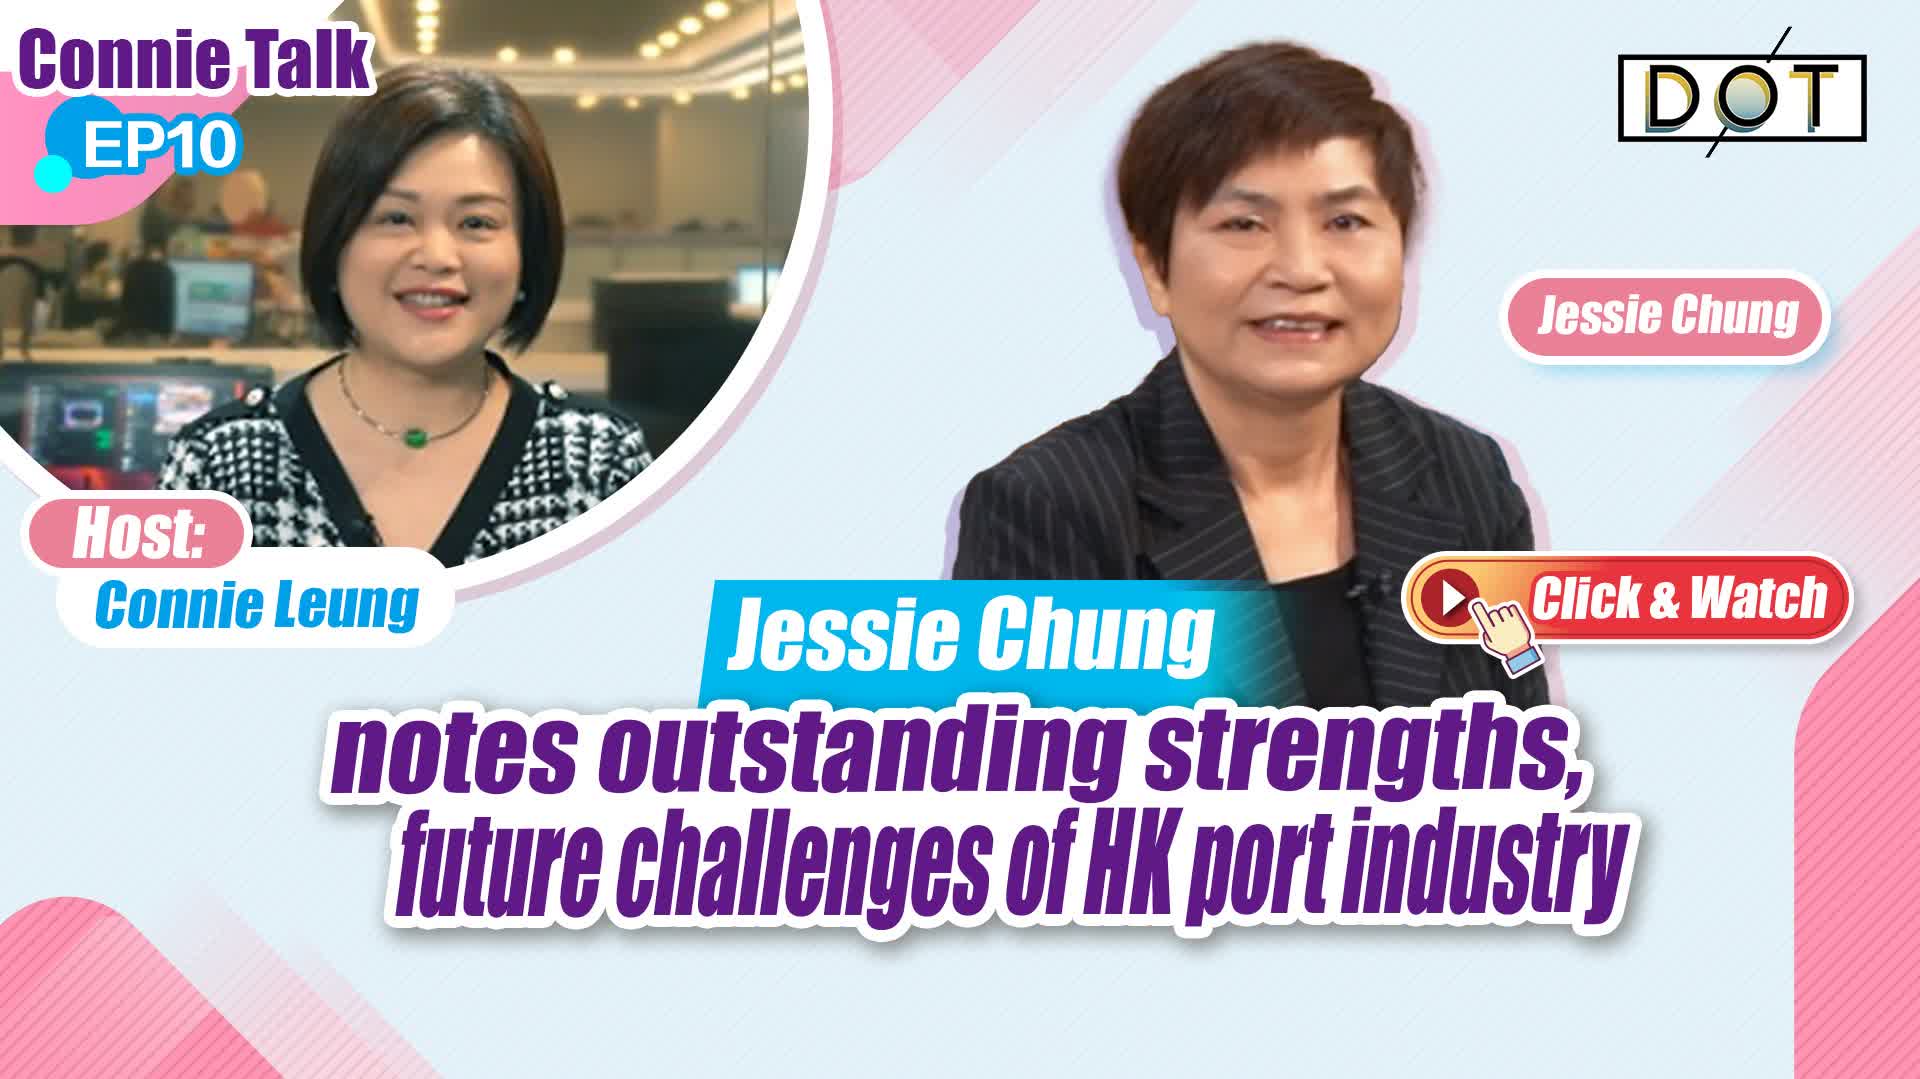 Connie Talk | Jessie Chung notes outstanding strengths, future challenges of HK port industry